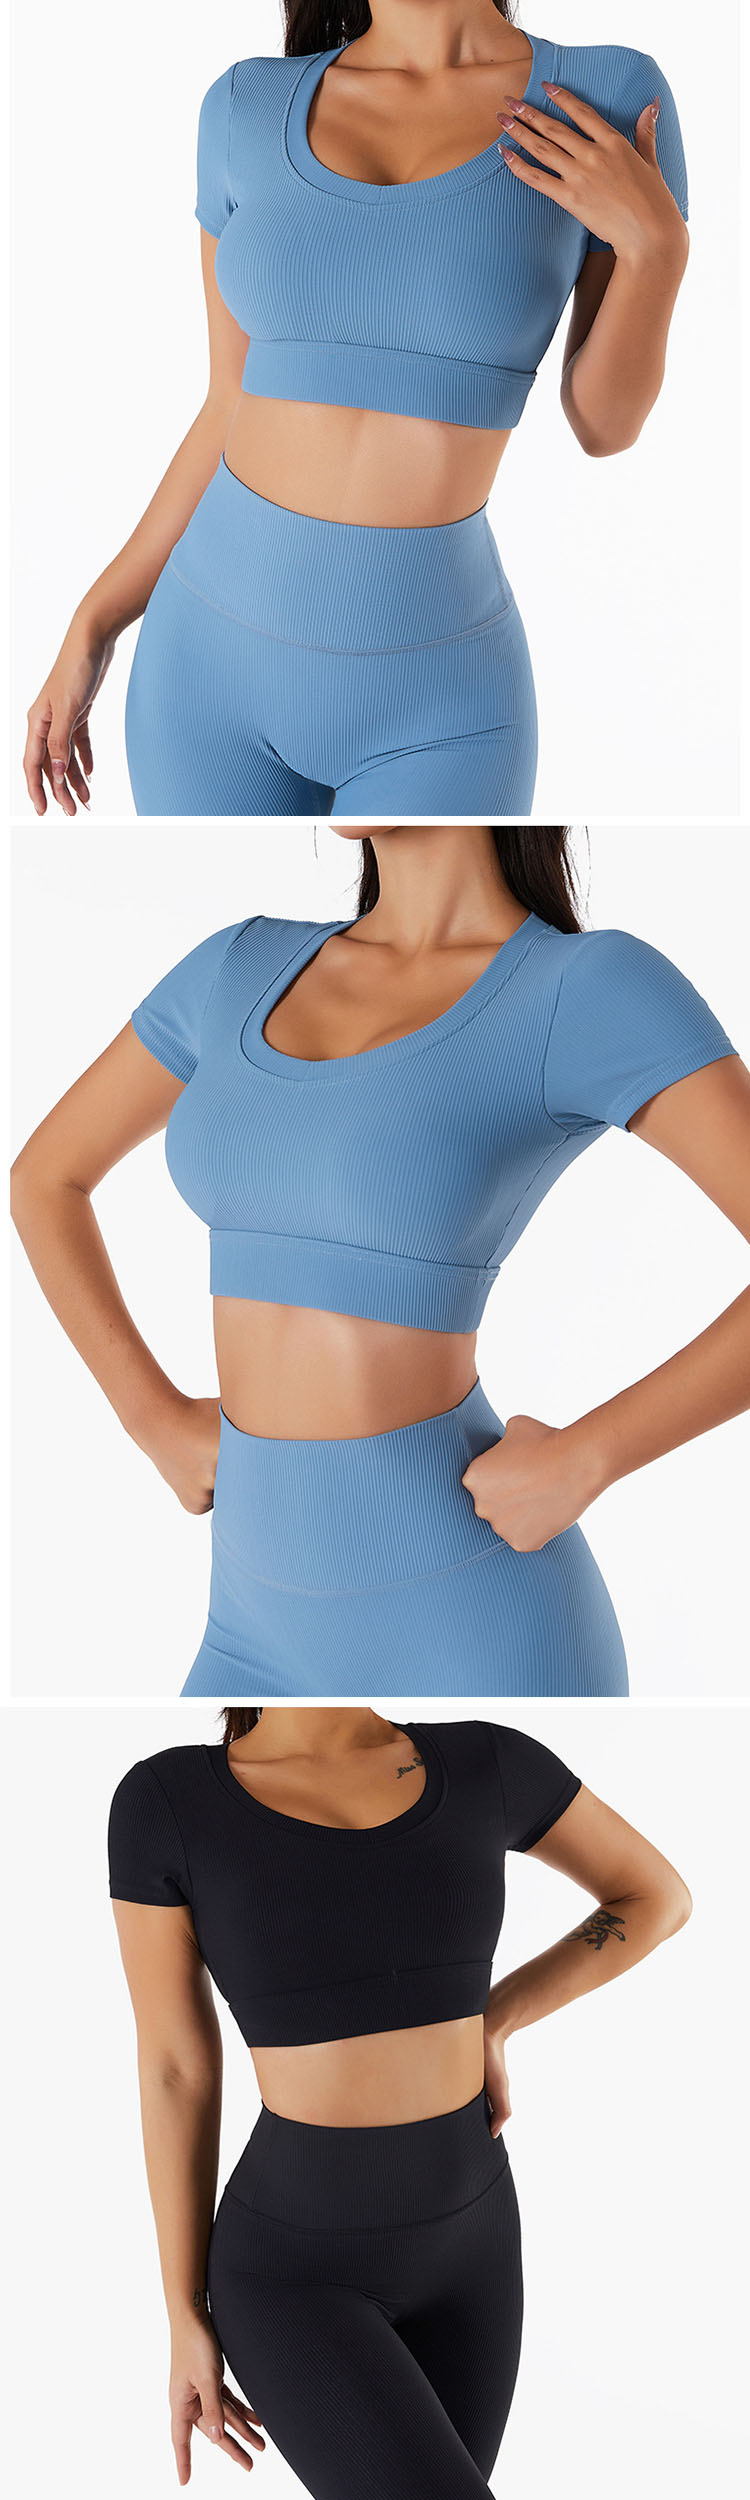 Comfortable stretch fabric is used to fit the body and exercise without burden.